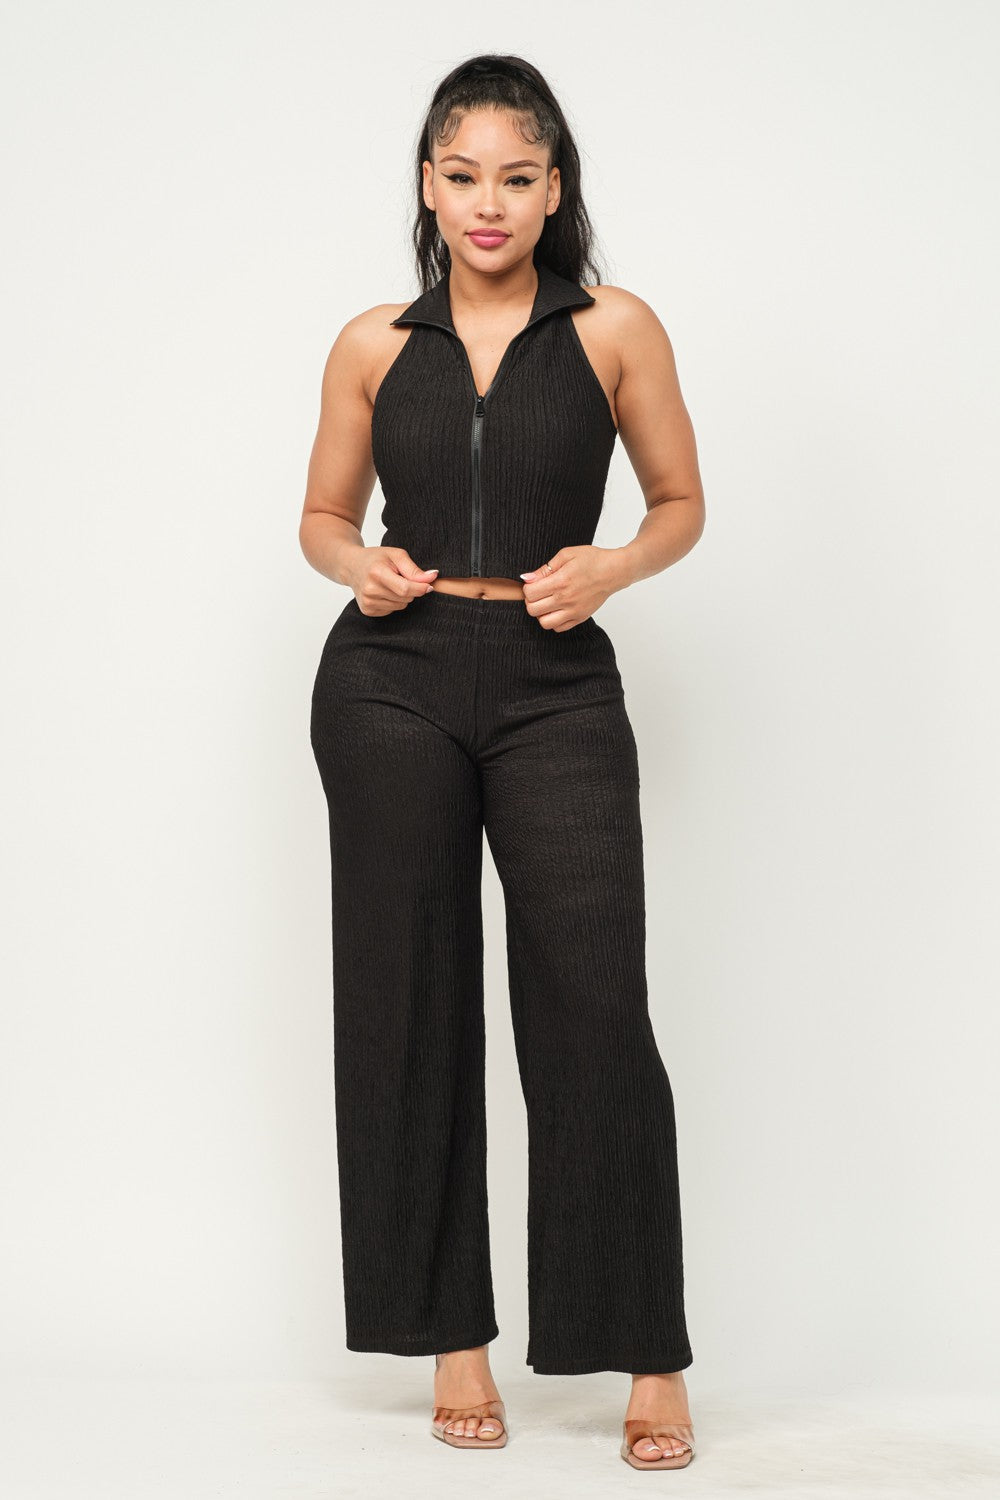 Winkle Textured Cropped Top / Pants Set